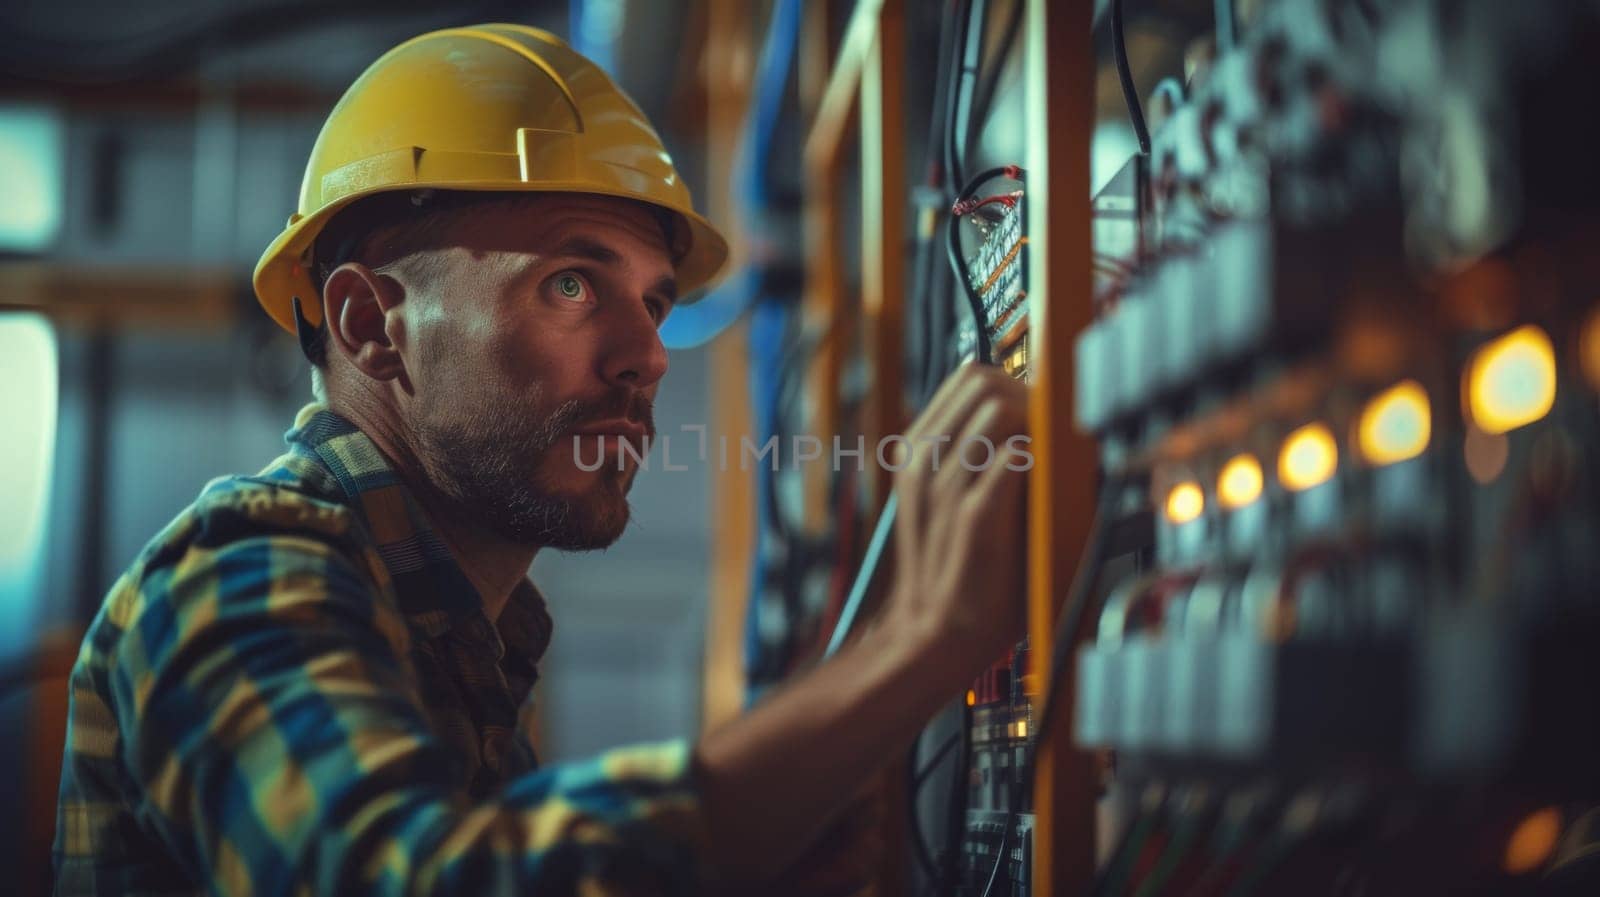 A man in a hard hat looking at some wires